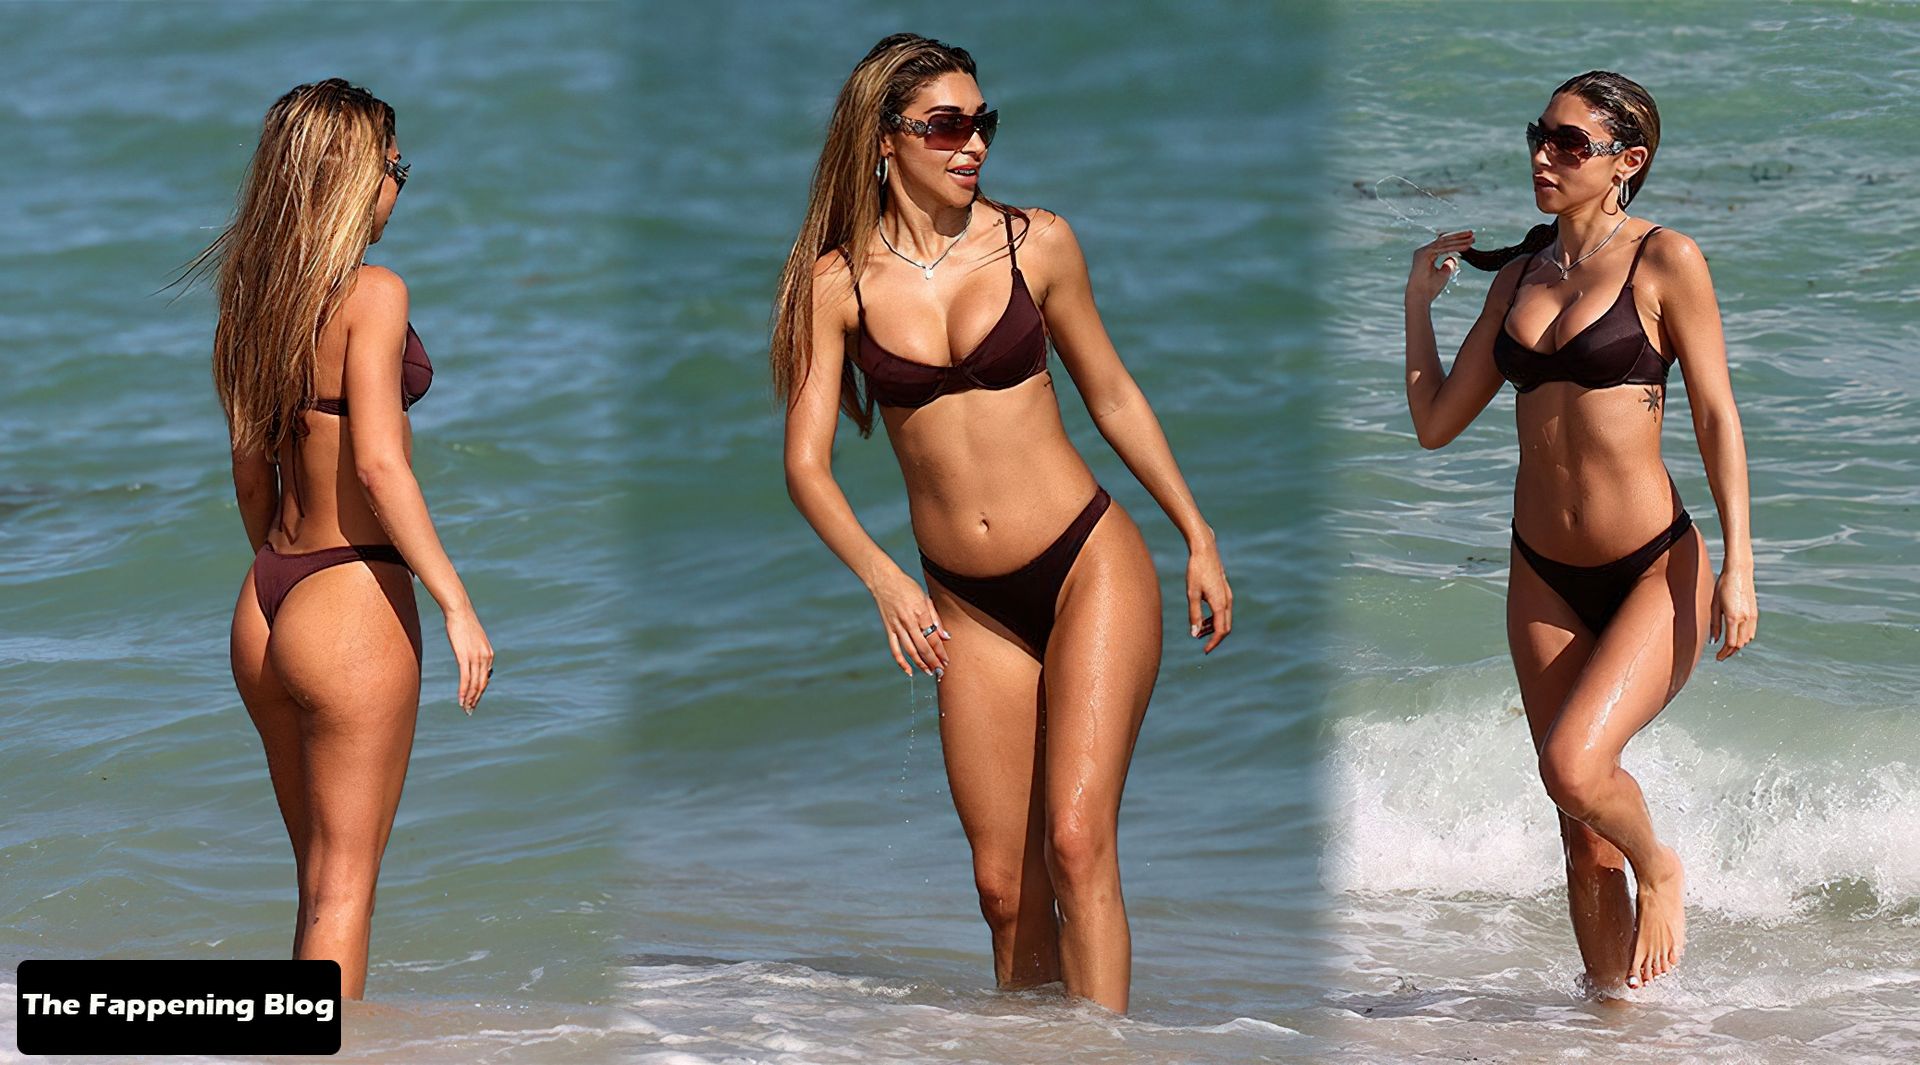 Chantel Jeffries Shows Off Her Fit Figure in a Bikini on the Beach in Miami (17 Photos)